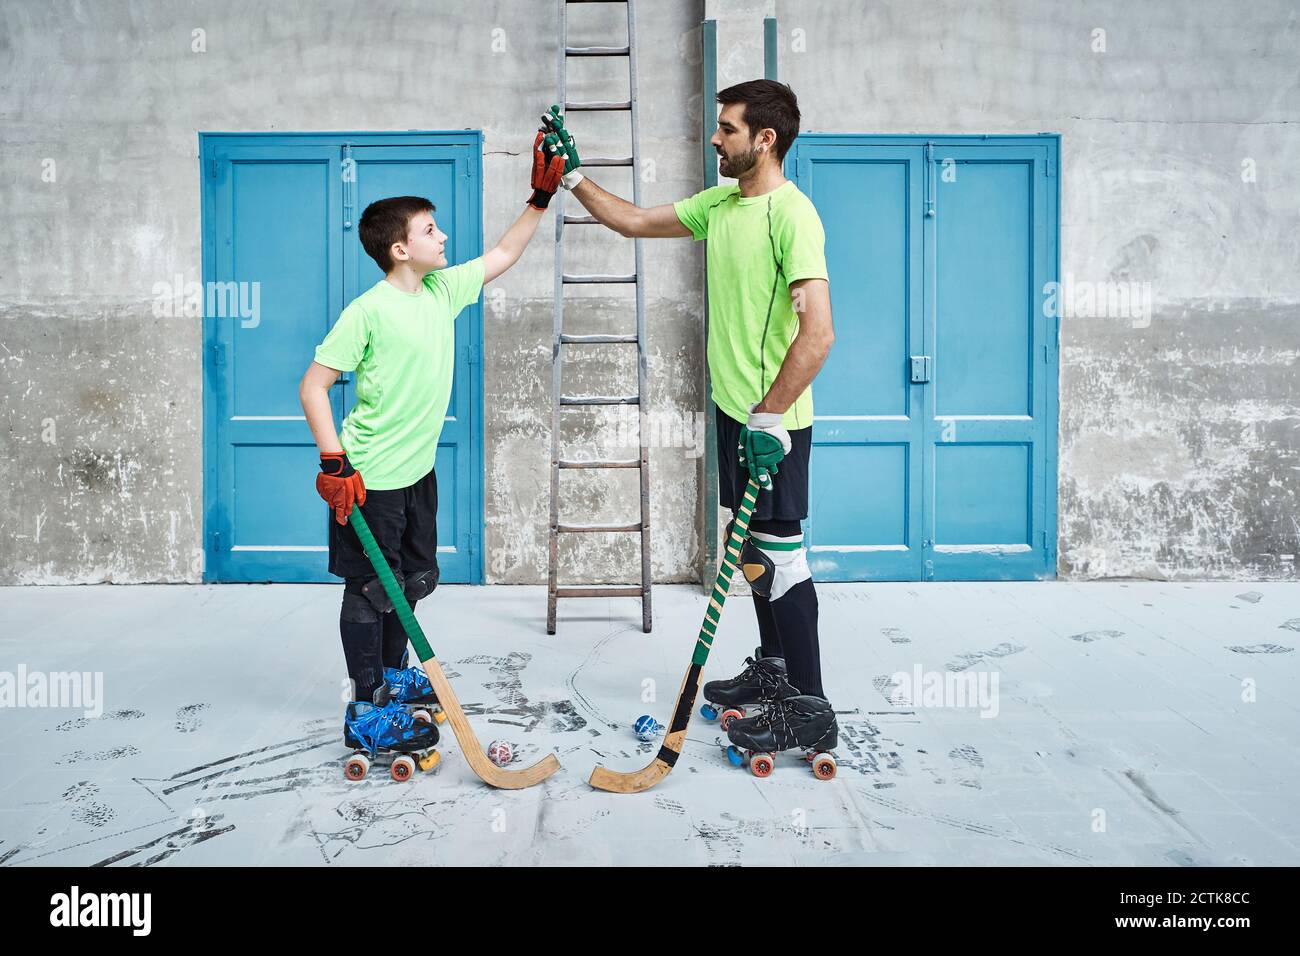 Father and son holding hockey sticks while giving high-fives against doors at court Stock Photo